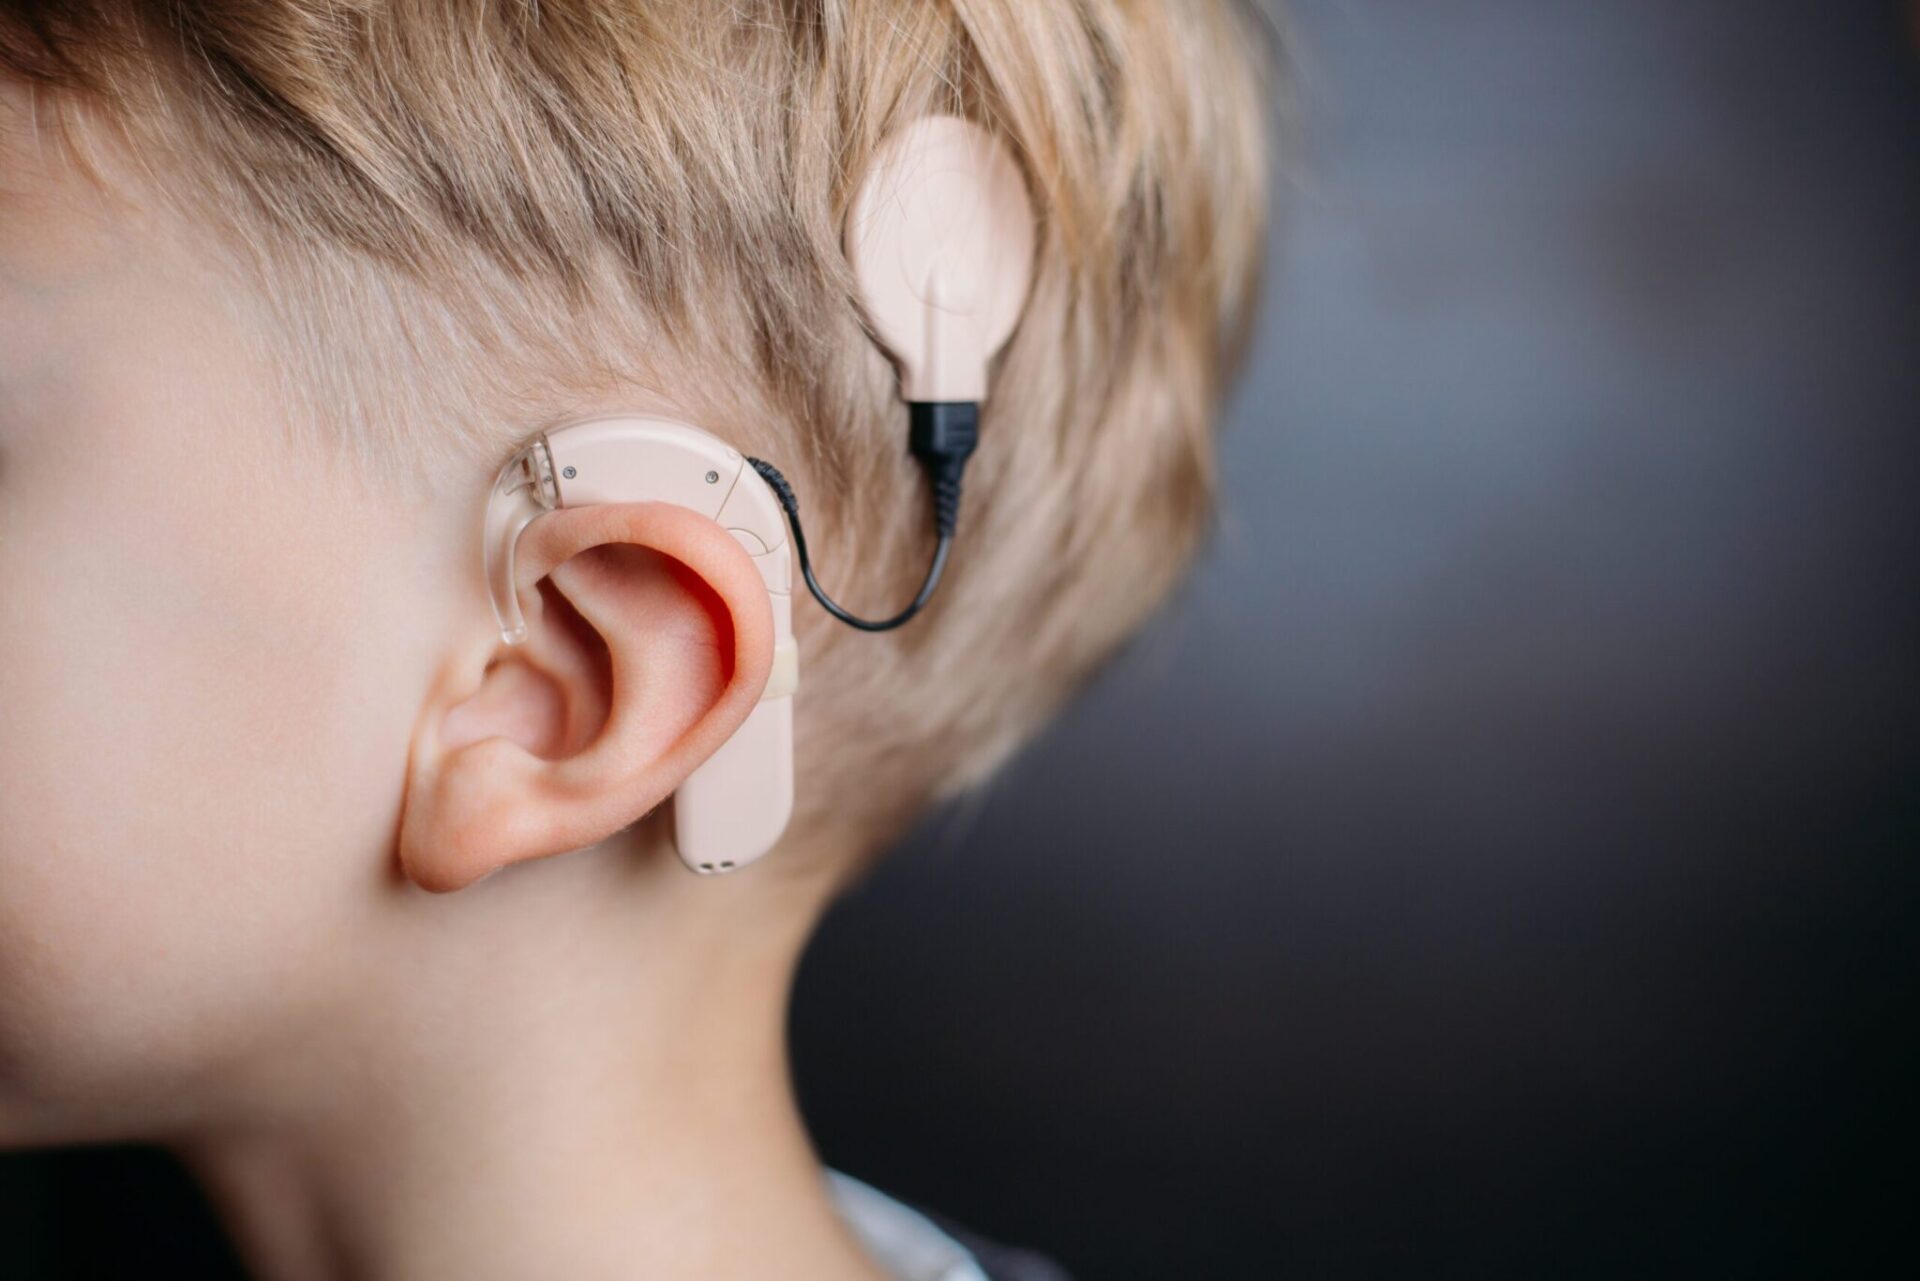 Boy with Cochlear implant on his head. / Child with hearing aid.